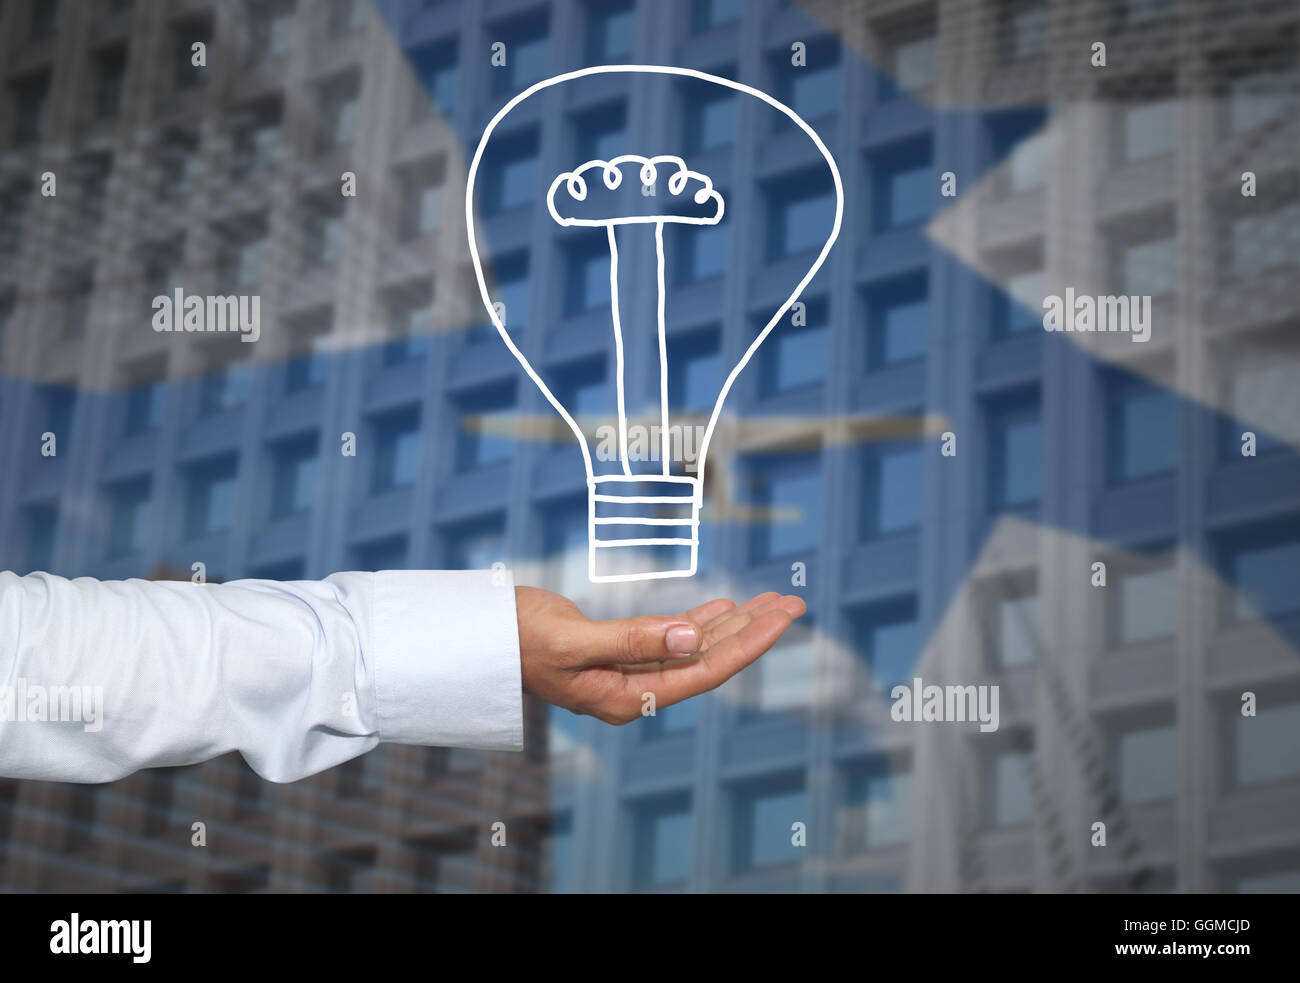 Drawing graphics lamp or bulb on hand to concept Creativity of new ideas in business and have skyscraper background. Stock Photo